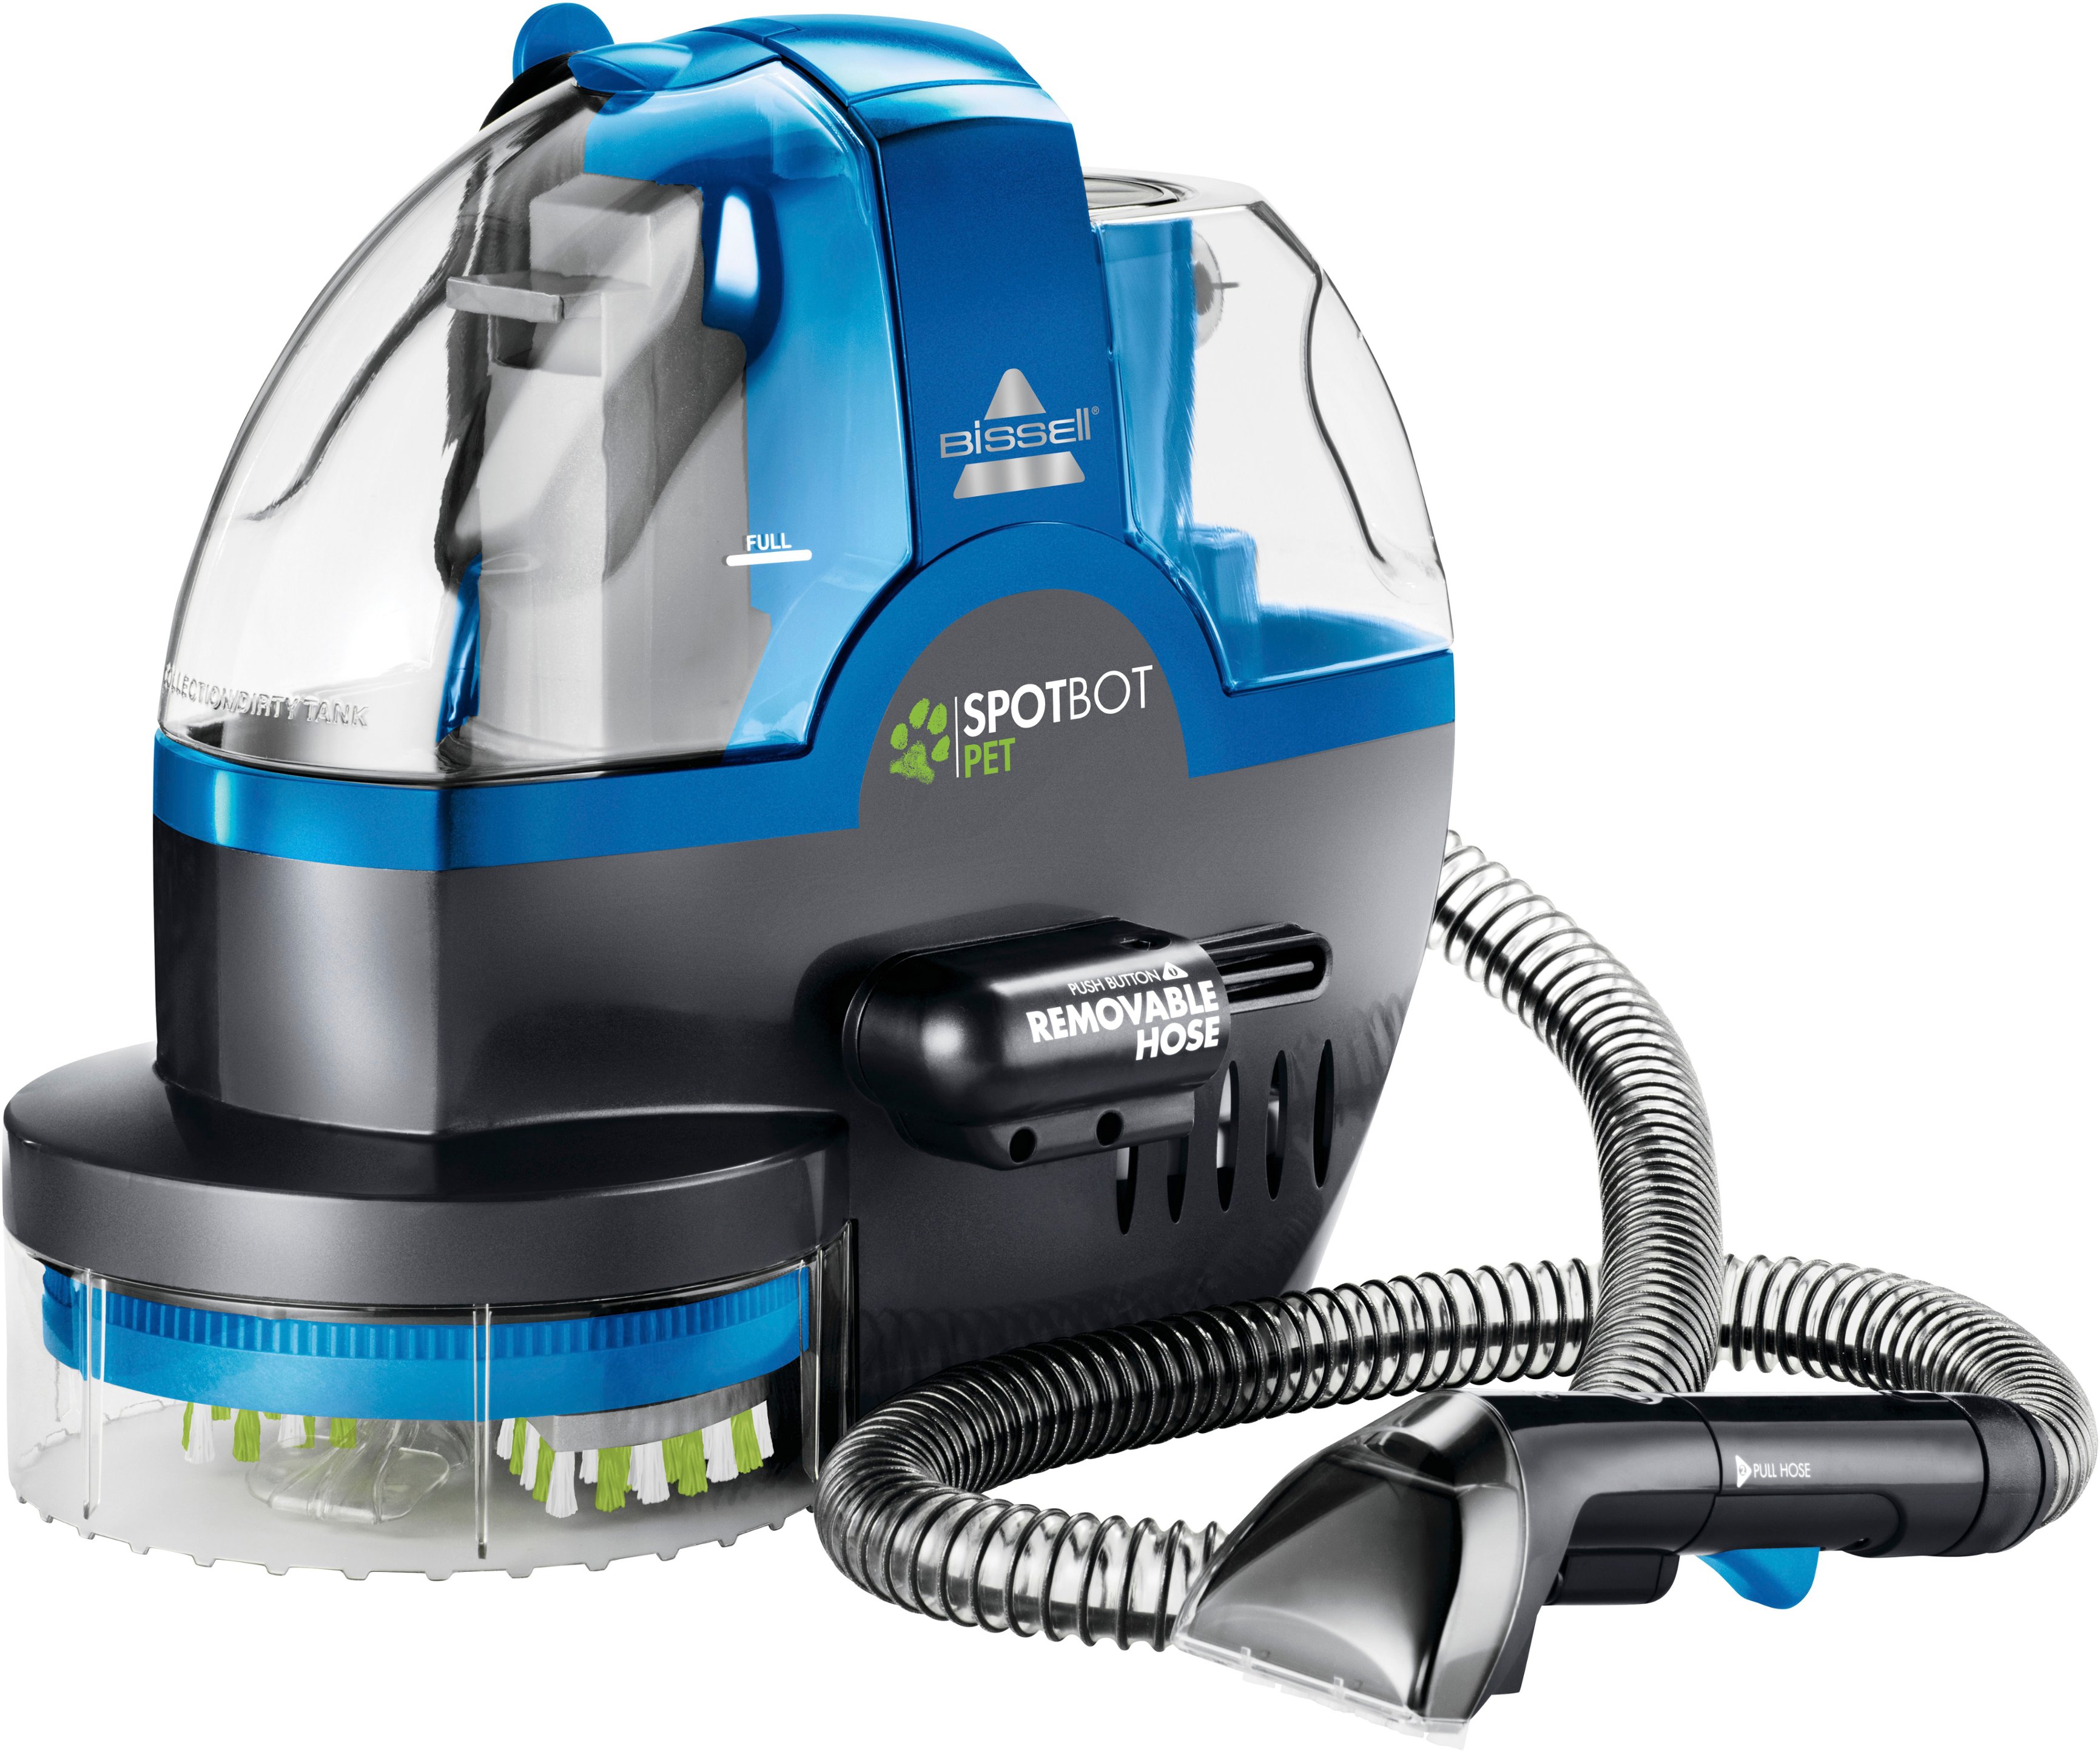 Angle View: BISSELL - SpotBot Pet Handheld Deep Cleaner - Cobalt